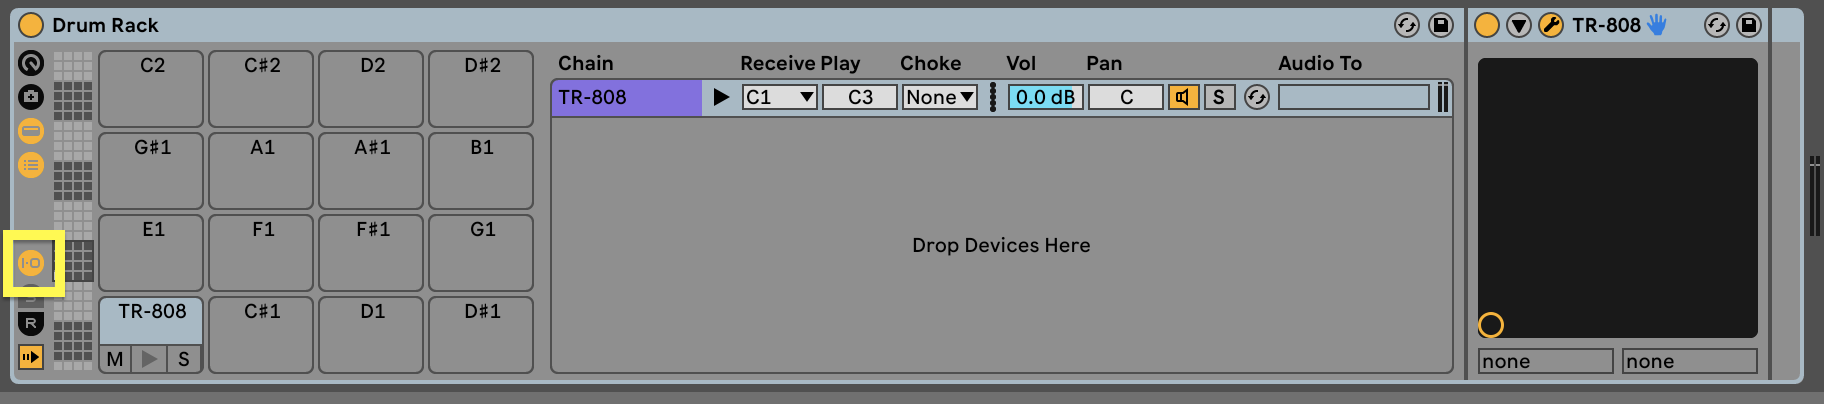 Ableton Live Drum Rack_input/output section